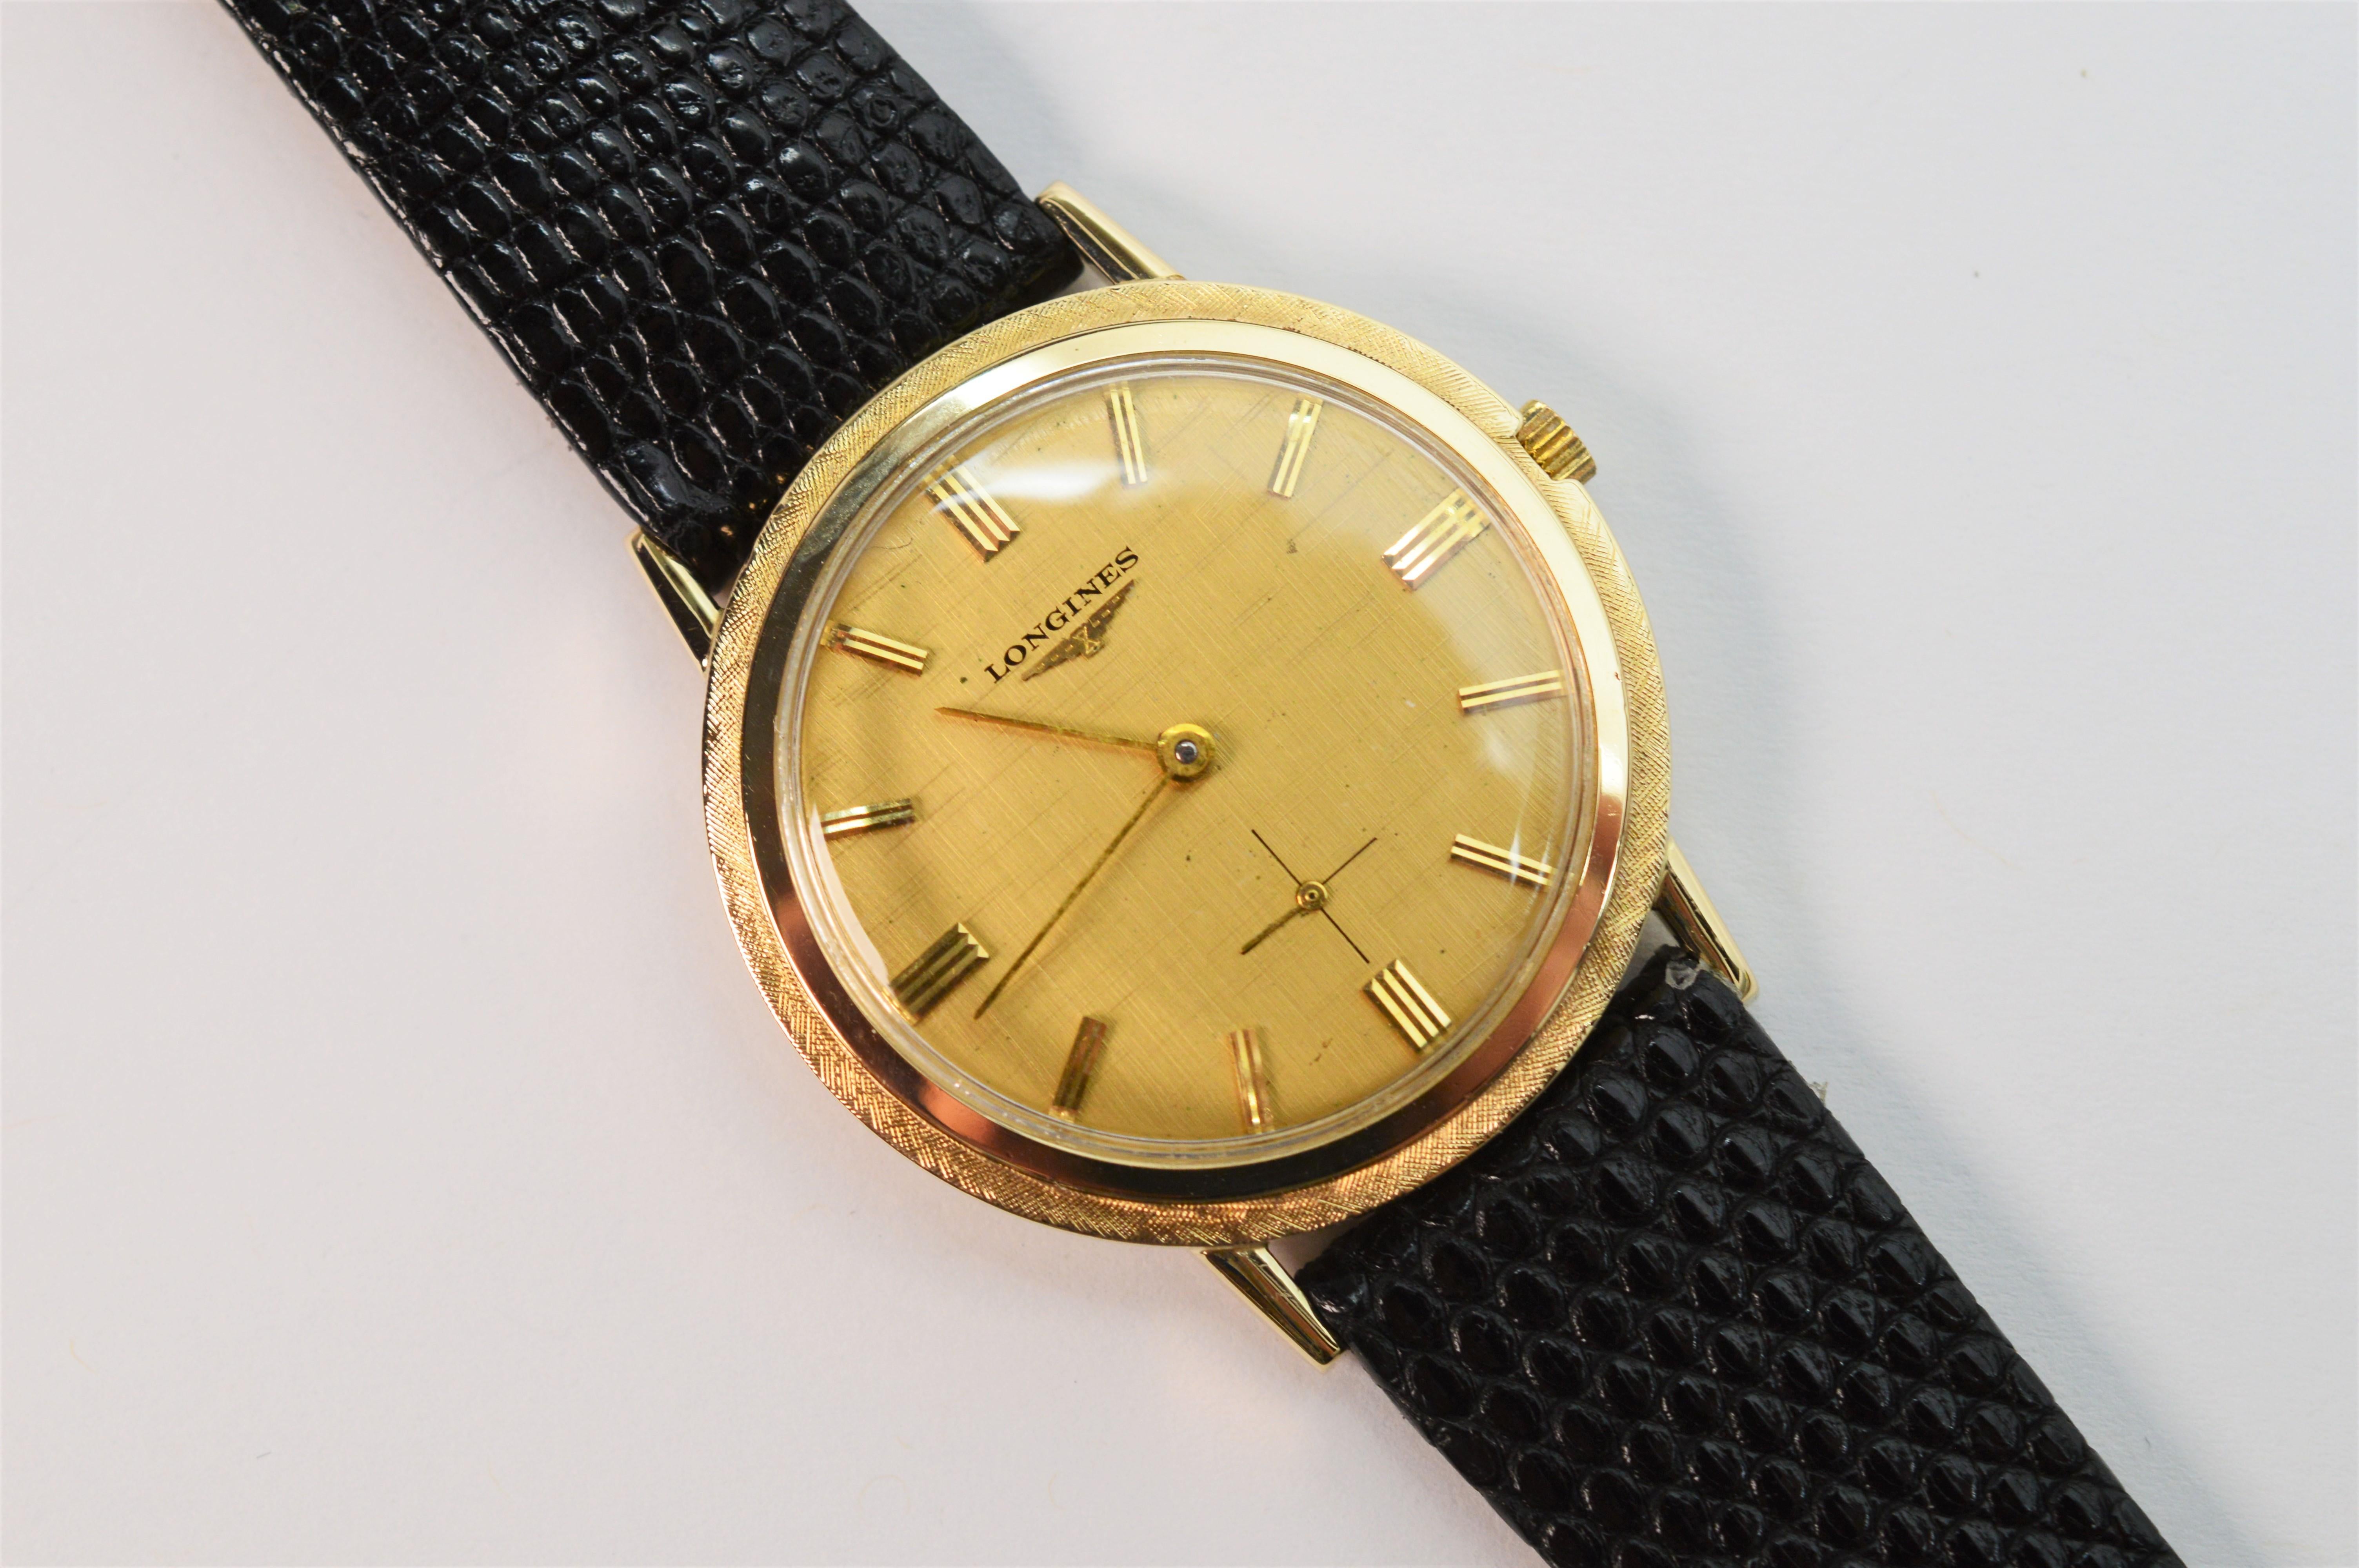 The slim lines of this 14K Yellow Gold Men's Longines Wrist Watch deliver retro style and comfort. Light weight, measuring 33mm with a manual wind 17 jeweled movement #12309475 LXW. 
The face of this vintage Longines is gold tone with matchstick